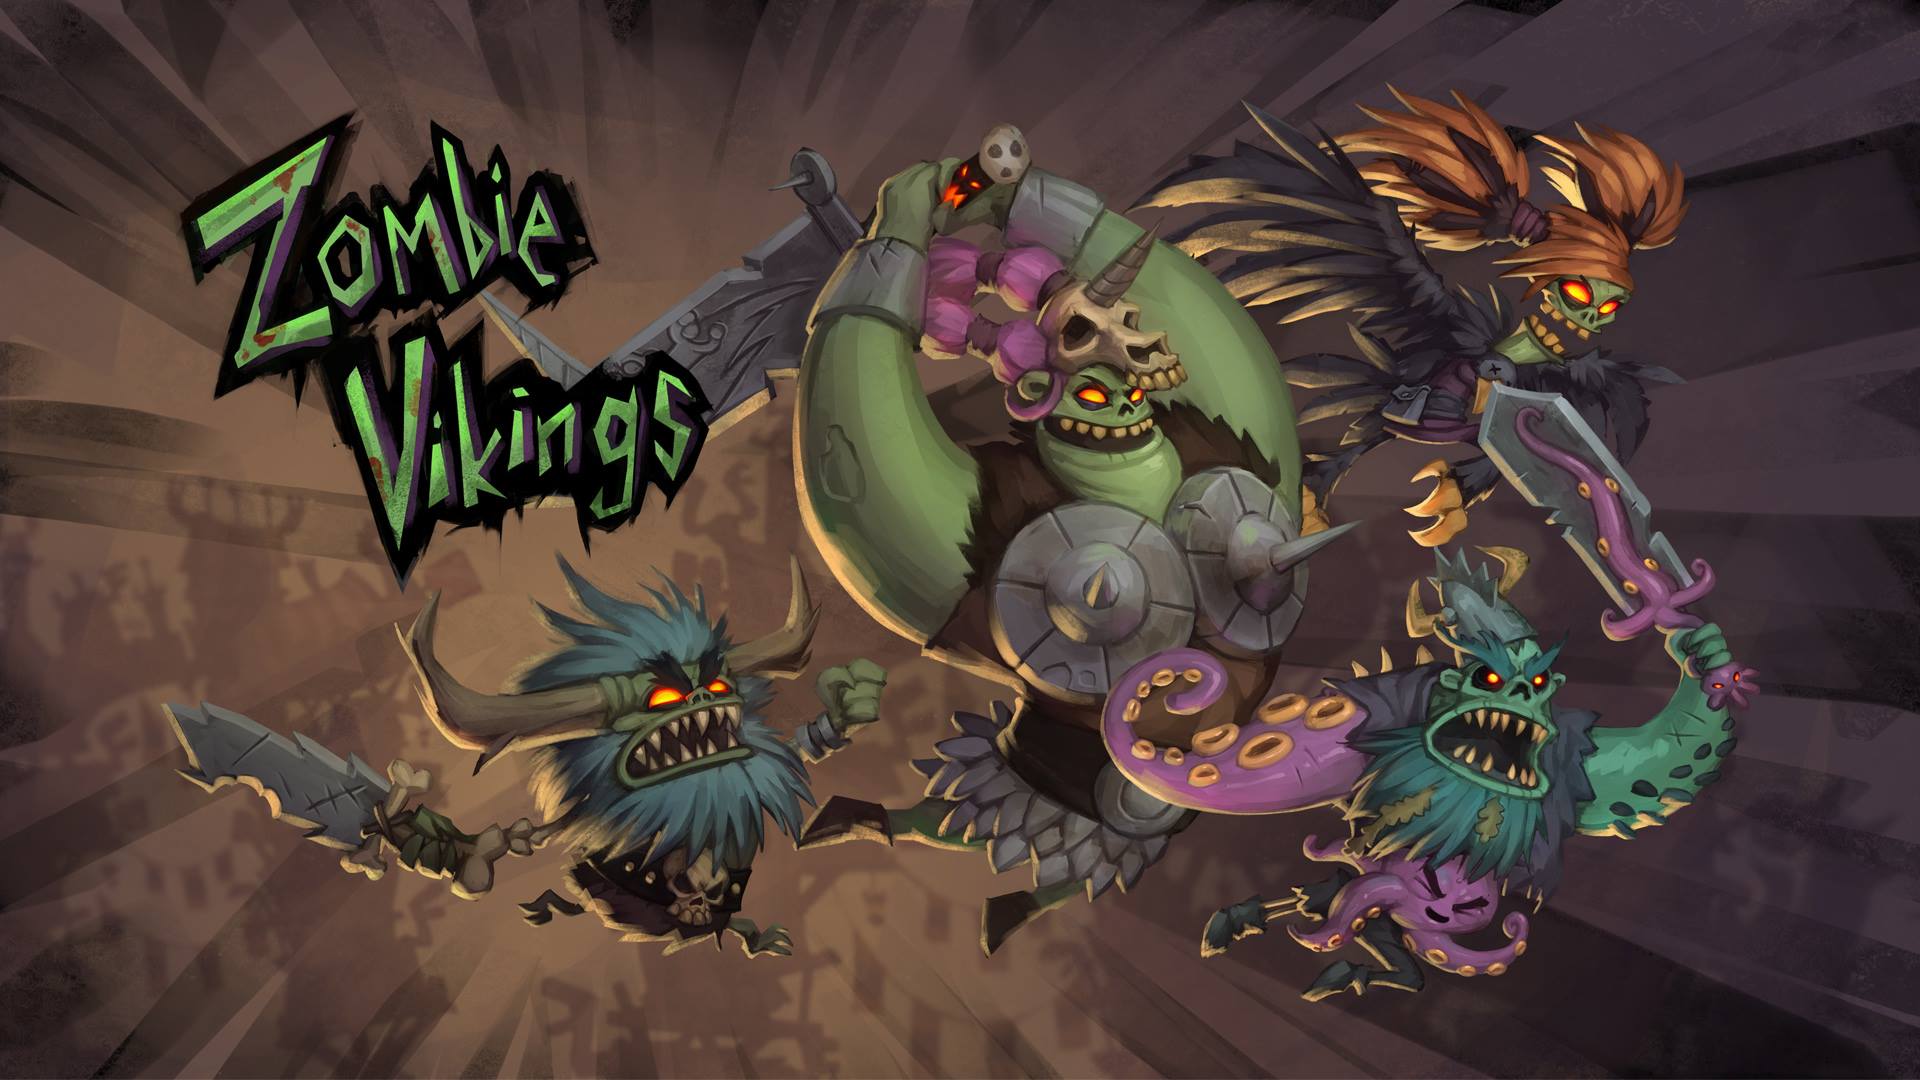 Download Zombie Vikings for PC